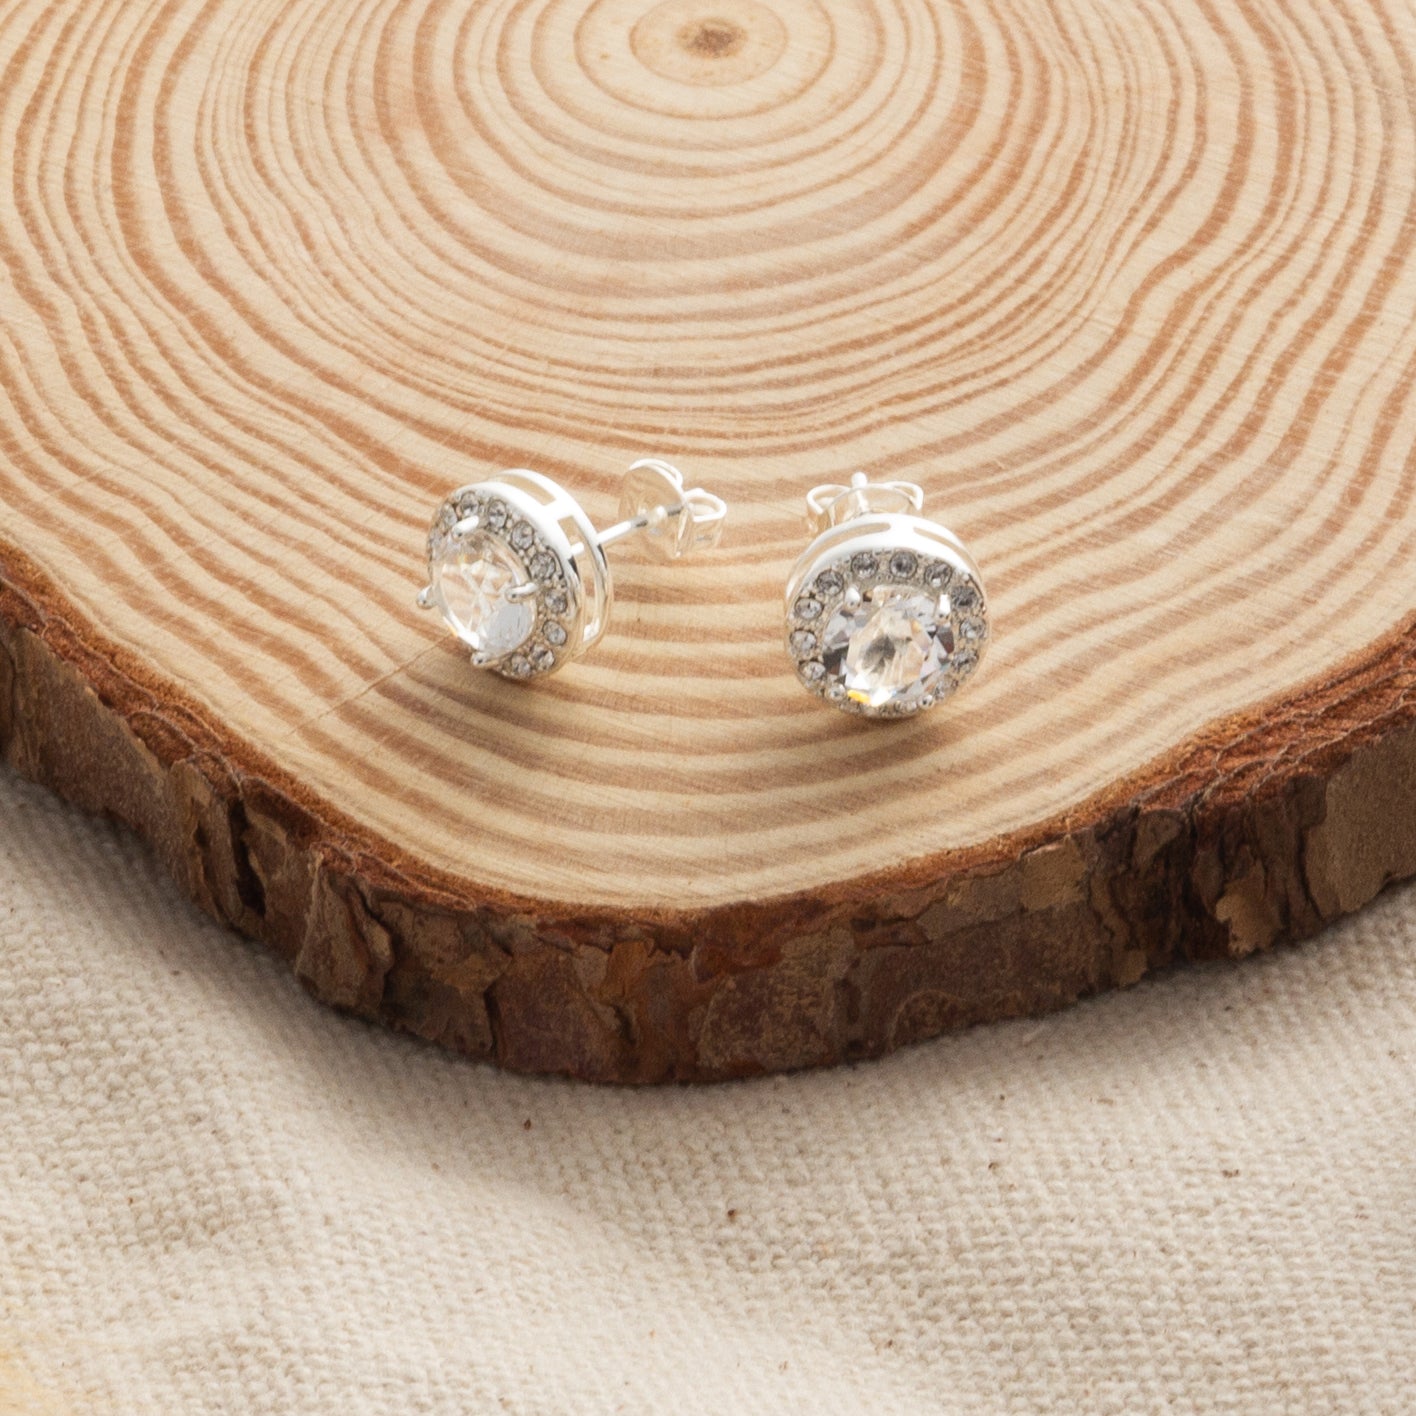 Silver Plated Halo Earrings Created with Zircondia® Crystals